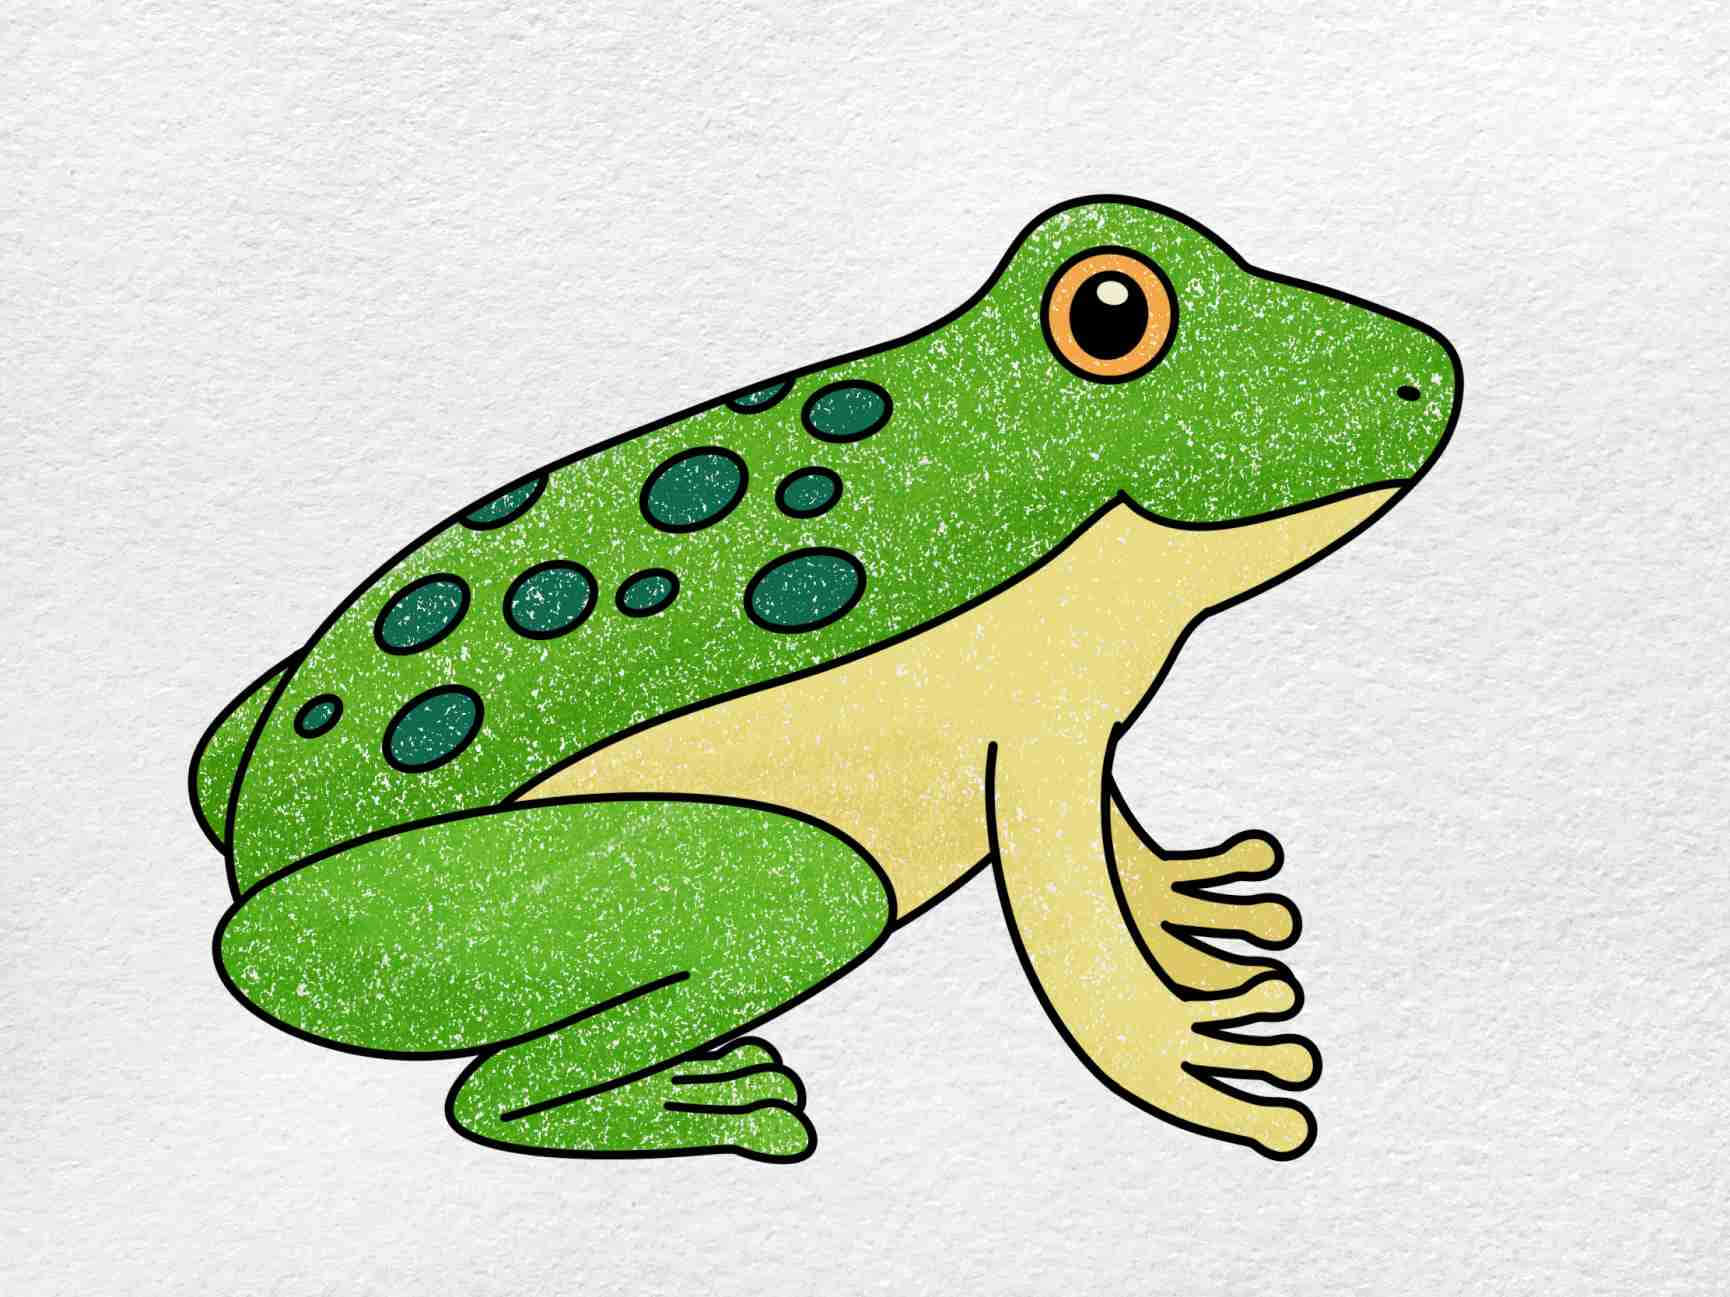 A Green Frog With Spots On Its Face